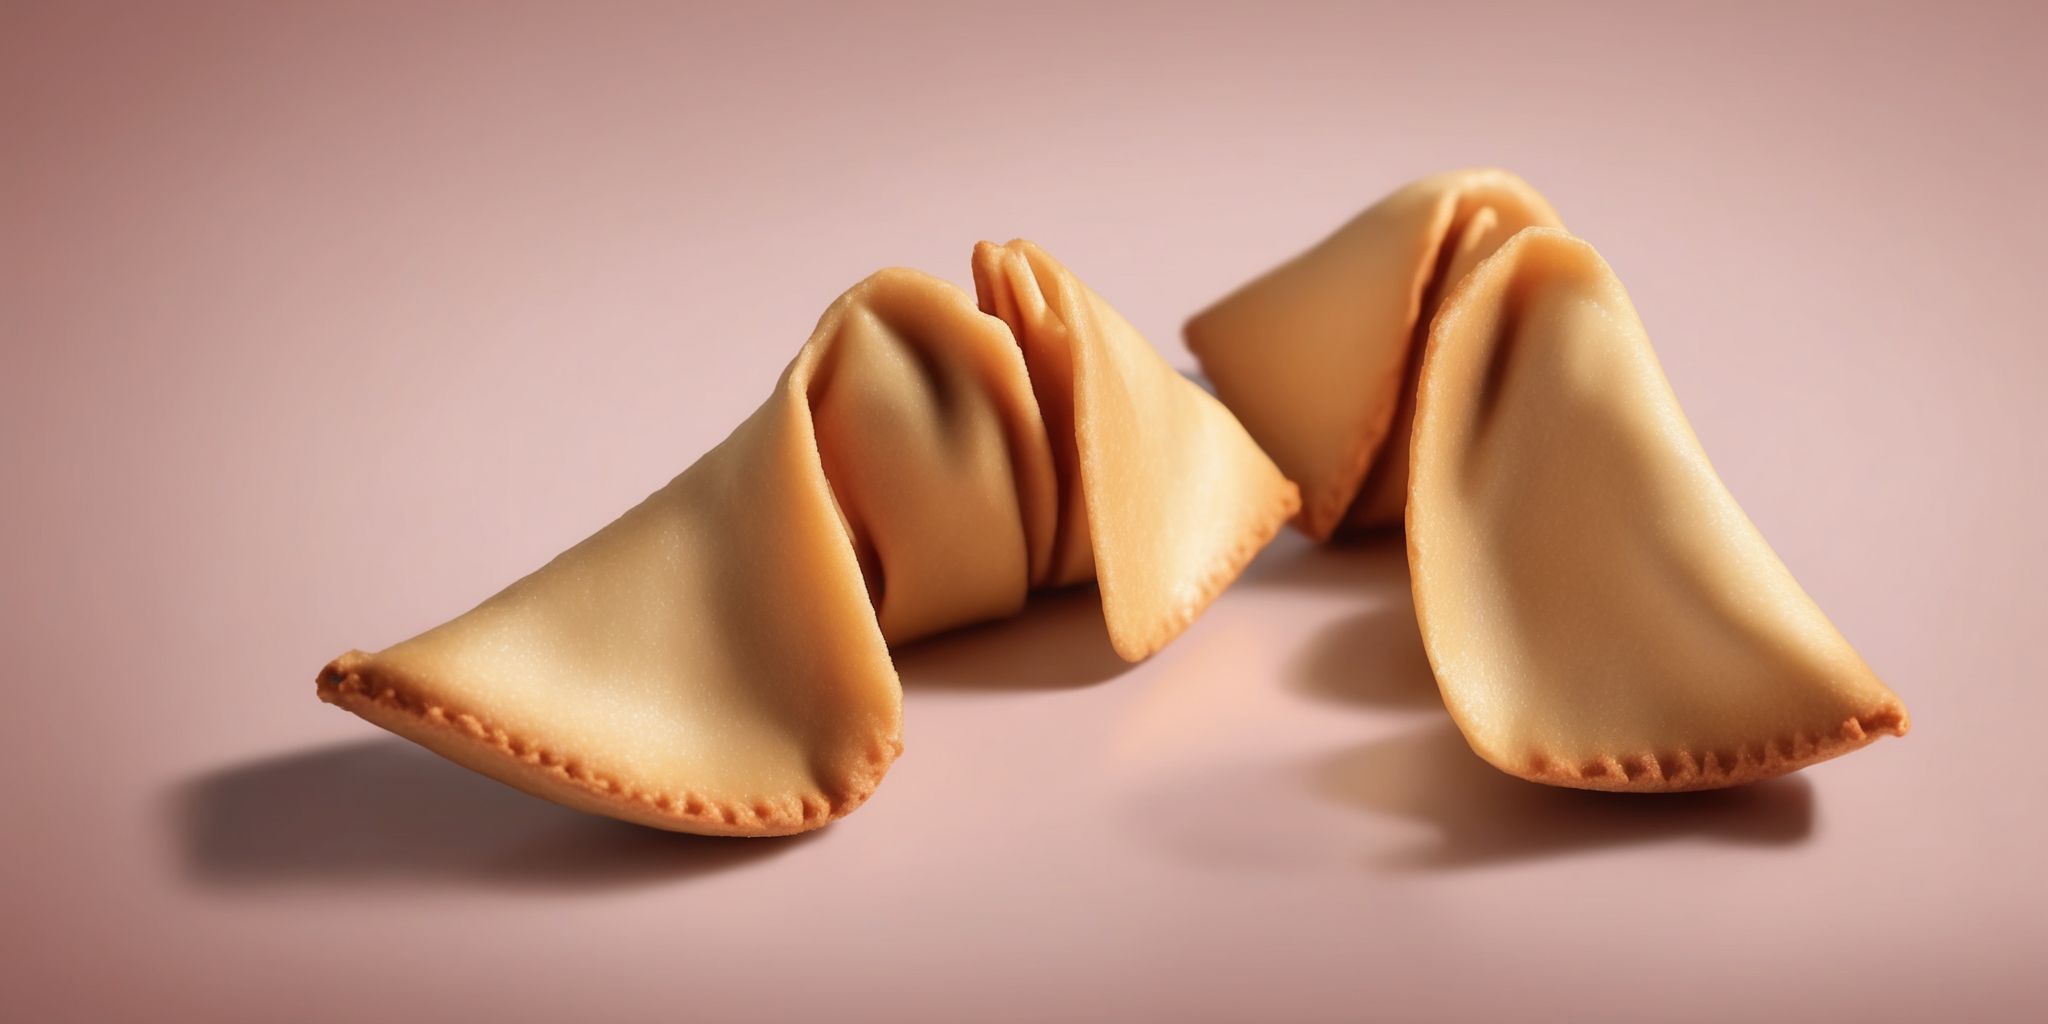 Fortune cookie  in realistic, photographic style